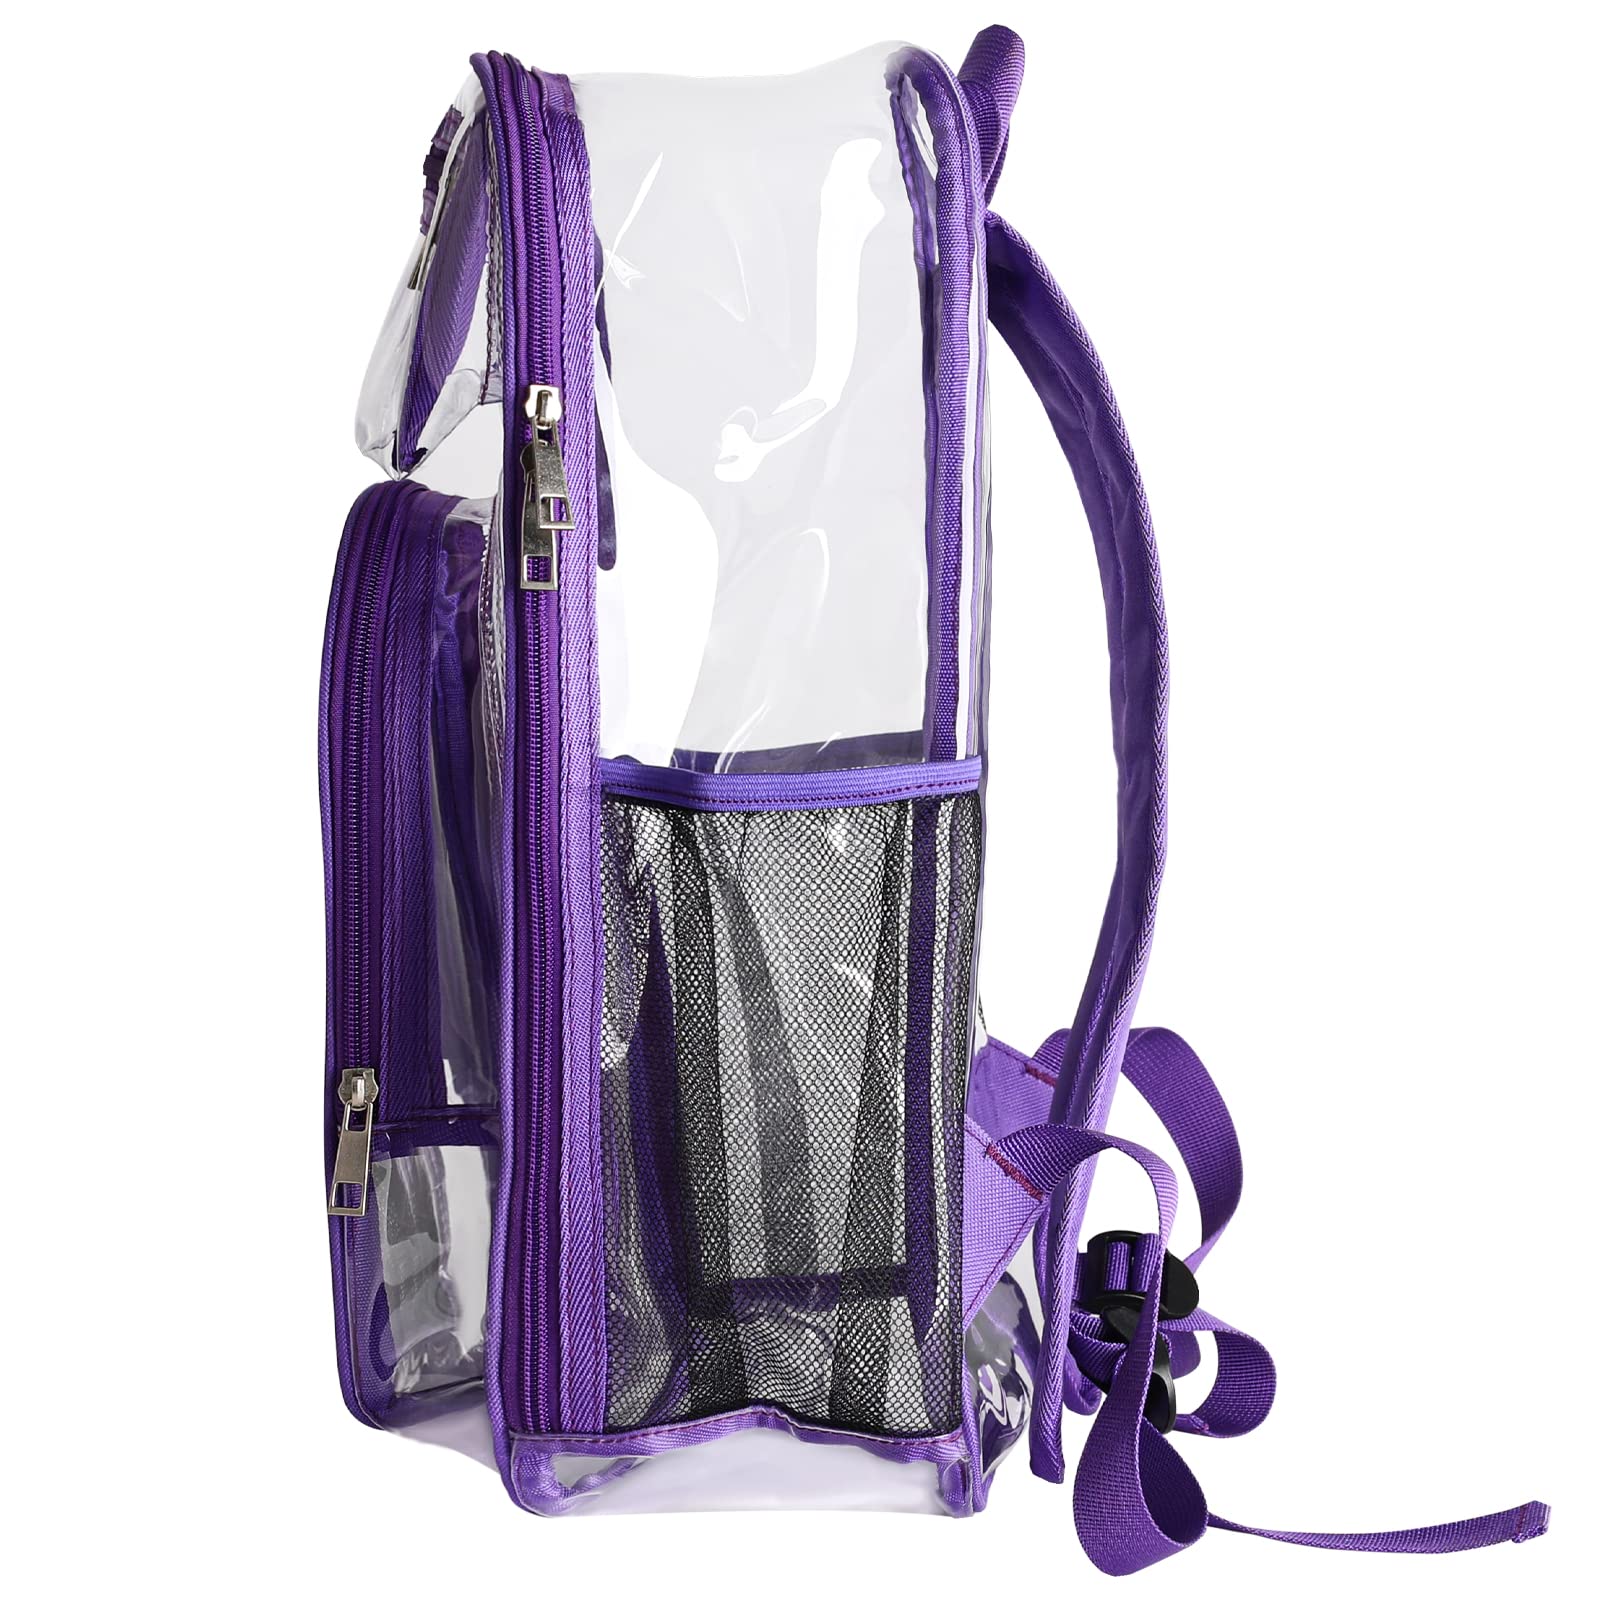 BEELIFY Clear Backpack - Heavy-duty PVC Multiple Compartments Transparent Bag - Large-capacity See-through Backpacks for Study/Travel/Workplace-Purple